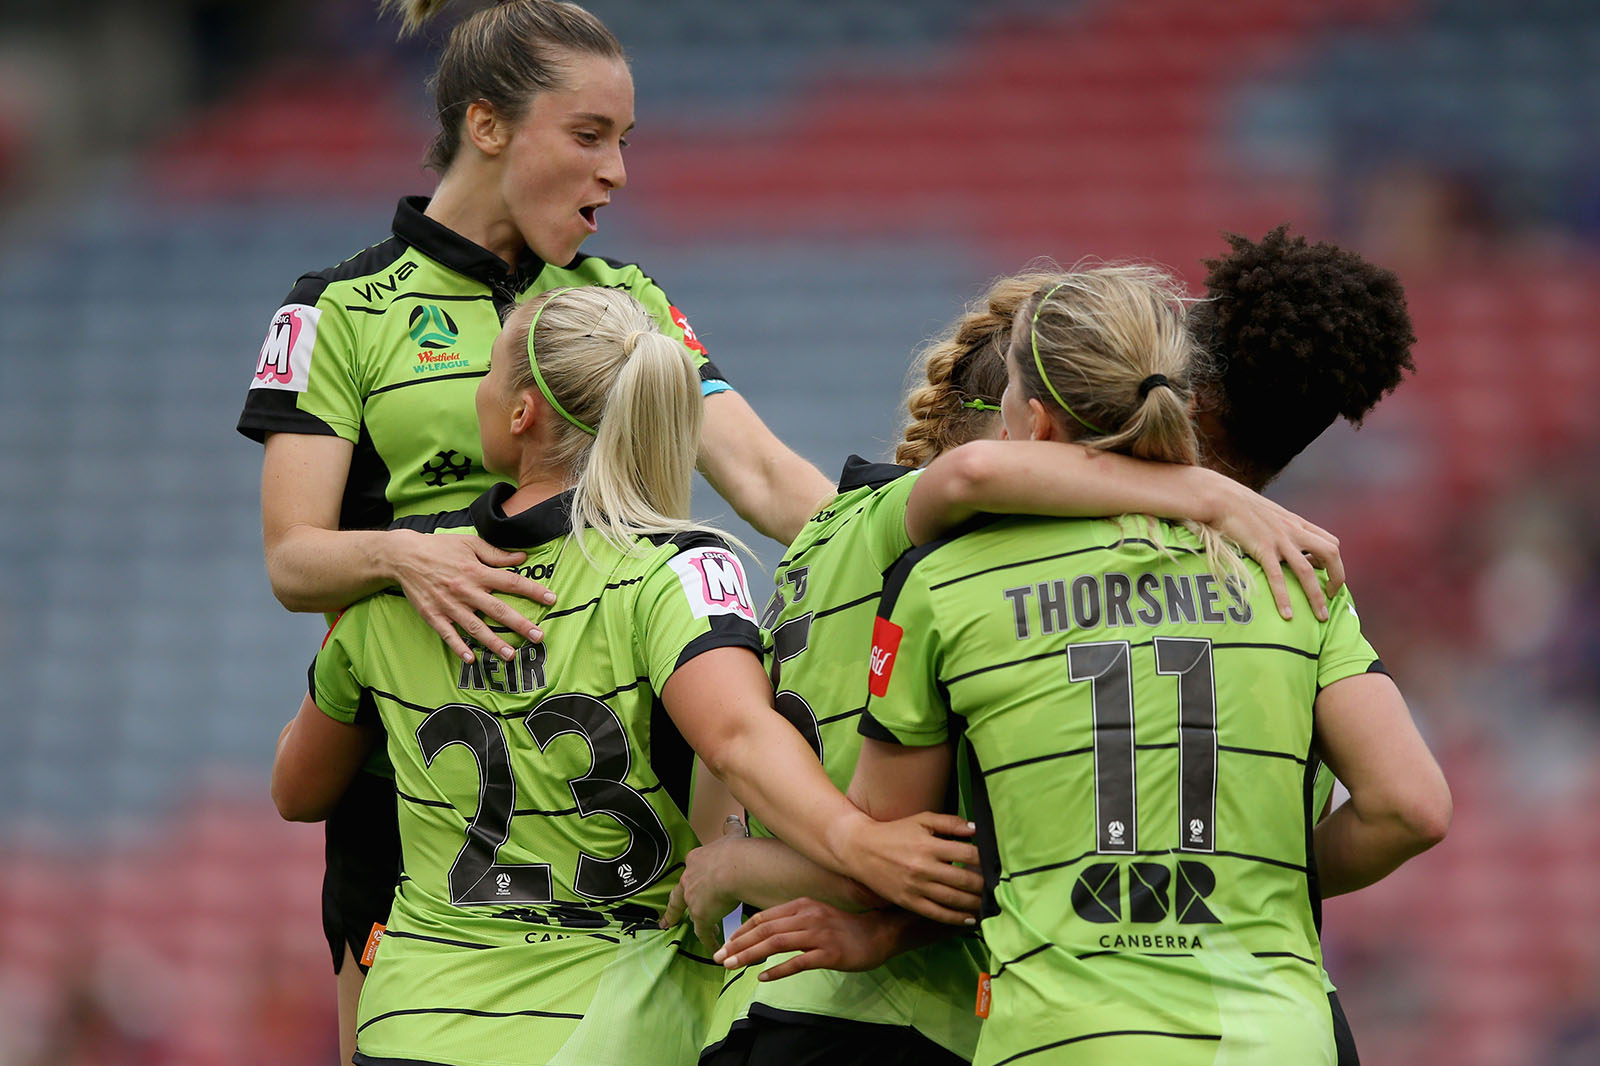 Canberra United defeat Newcastle Jets 